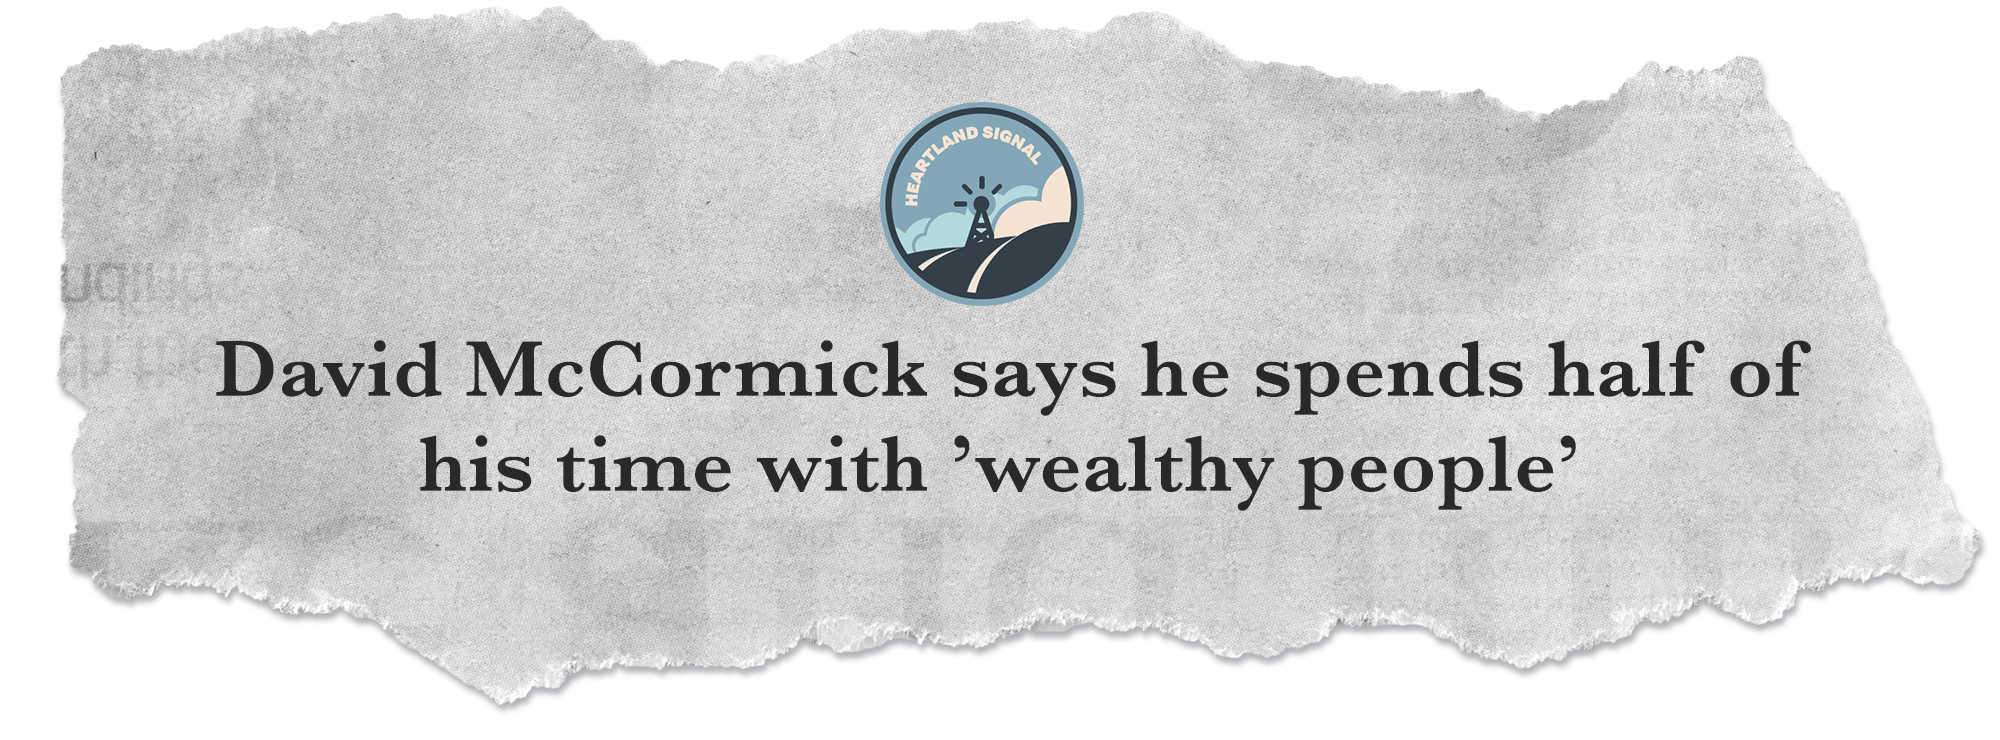 https://heartlandsignal.com/2024/01/23/david-mccormick-says-he-spends-half-of-his-time-with-wealthy-people/